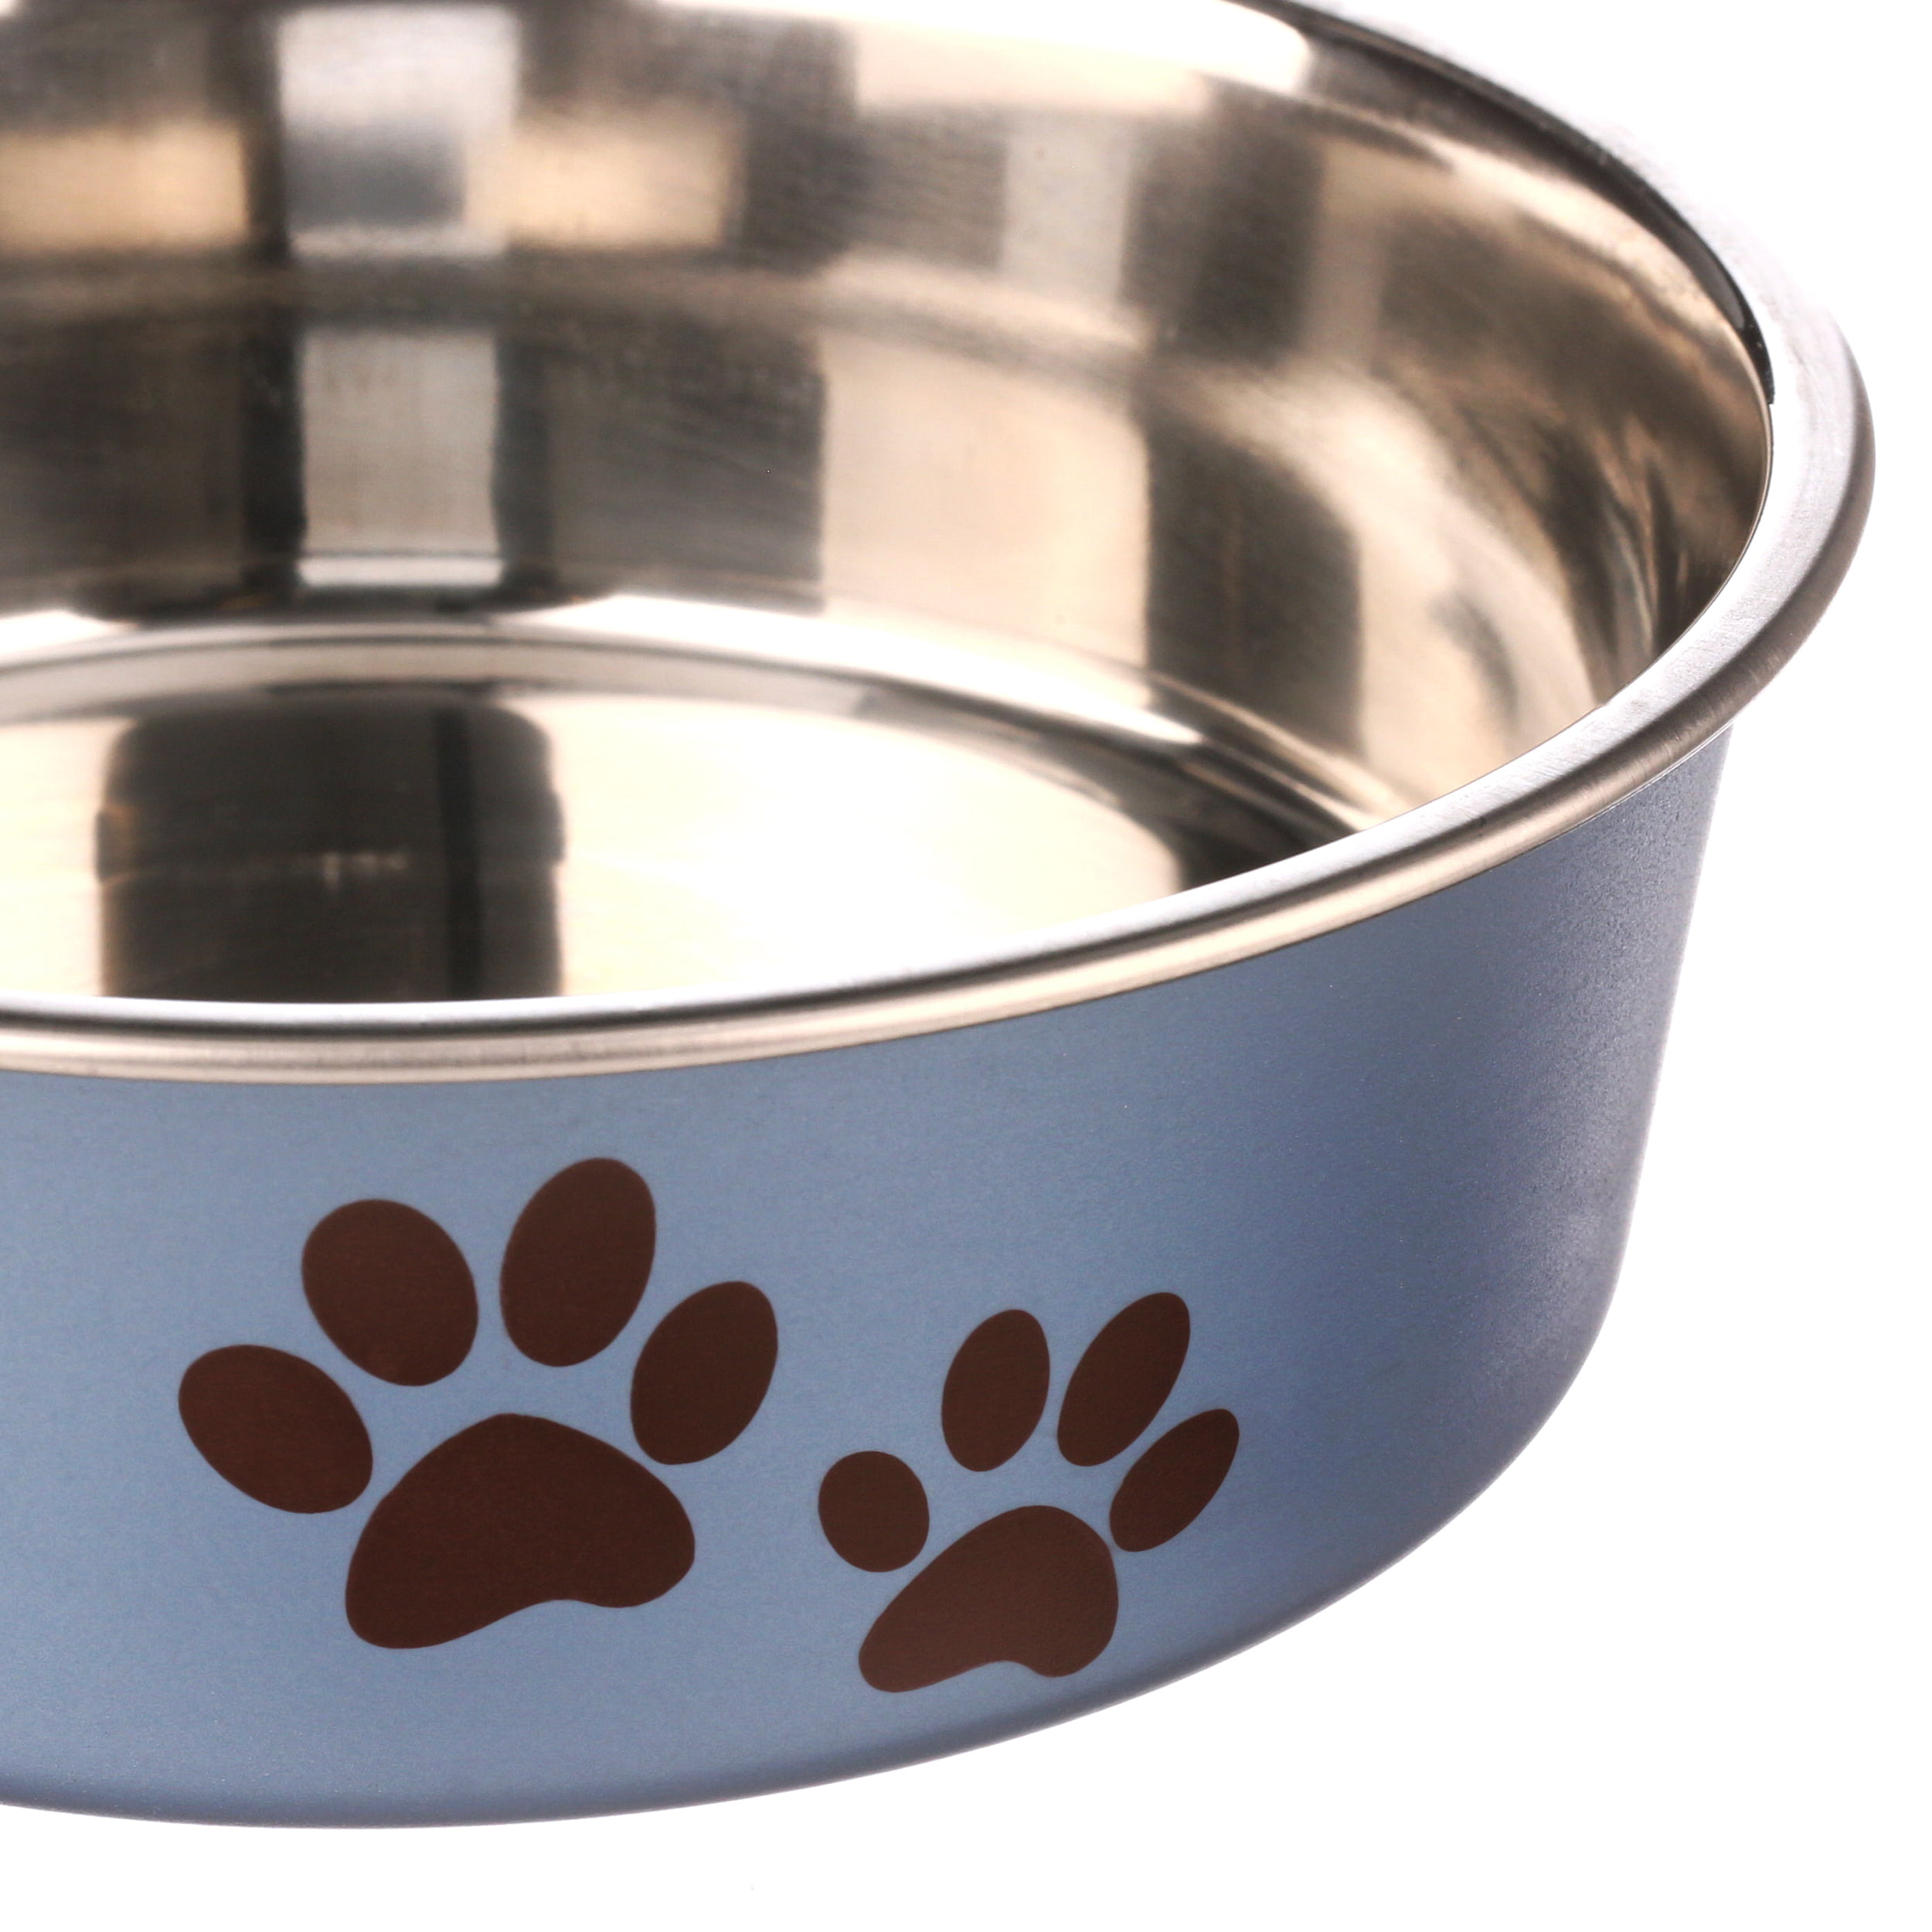 Classic Bella Bowl - Copper - Four Your Paws Only